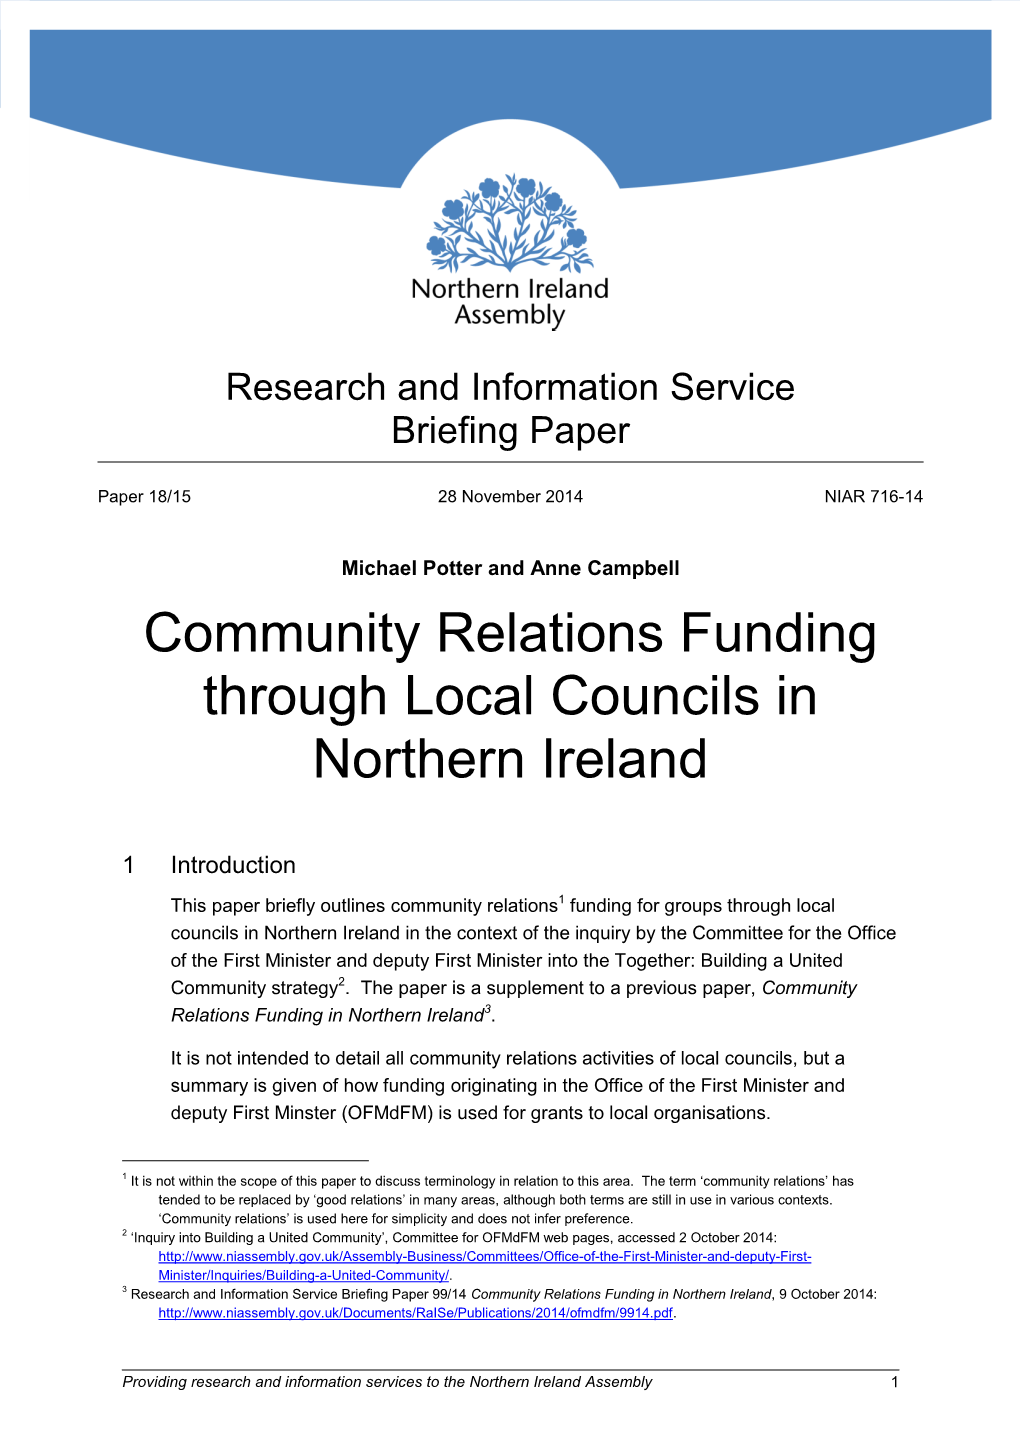 Community Relations Funding Through Local Councils in Northern Ireland